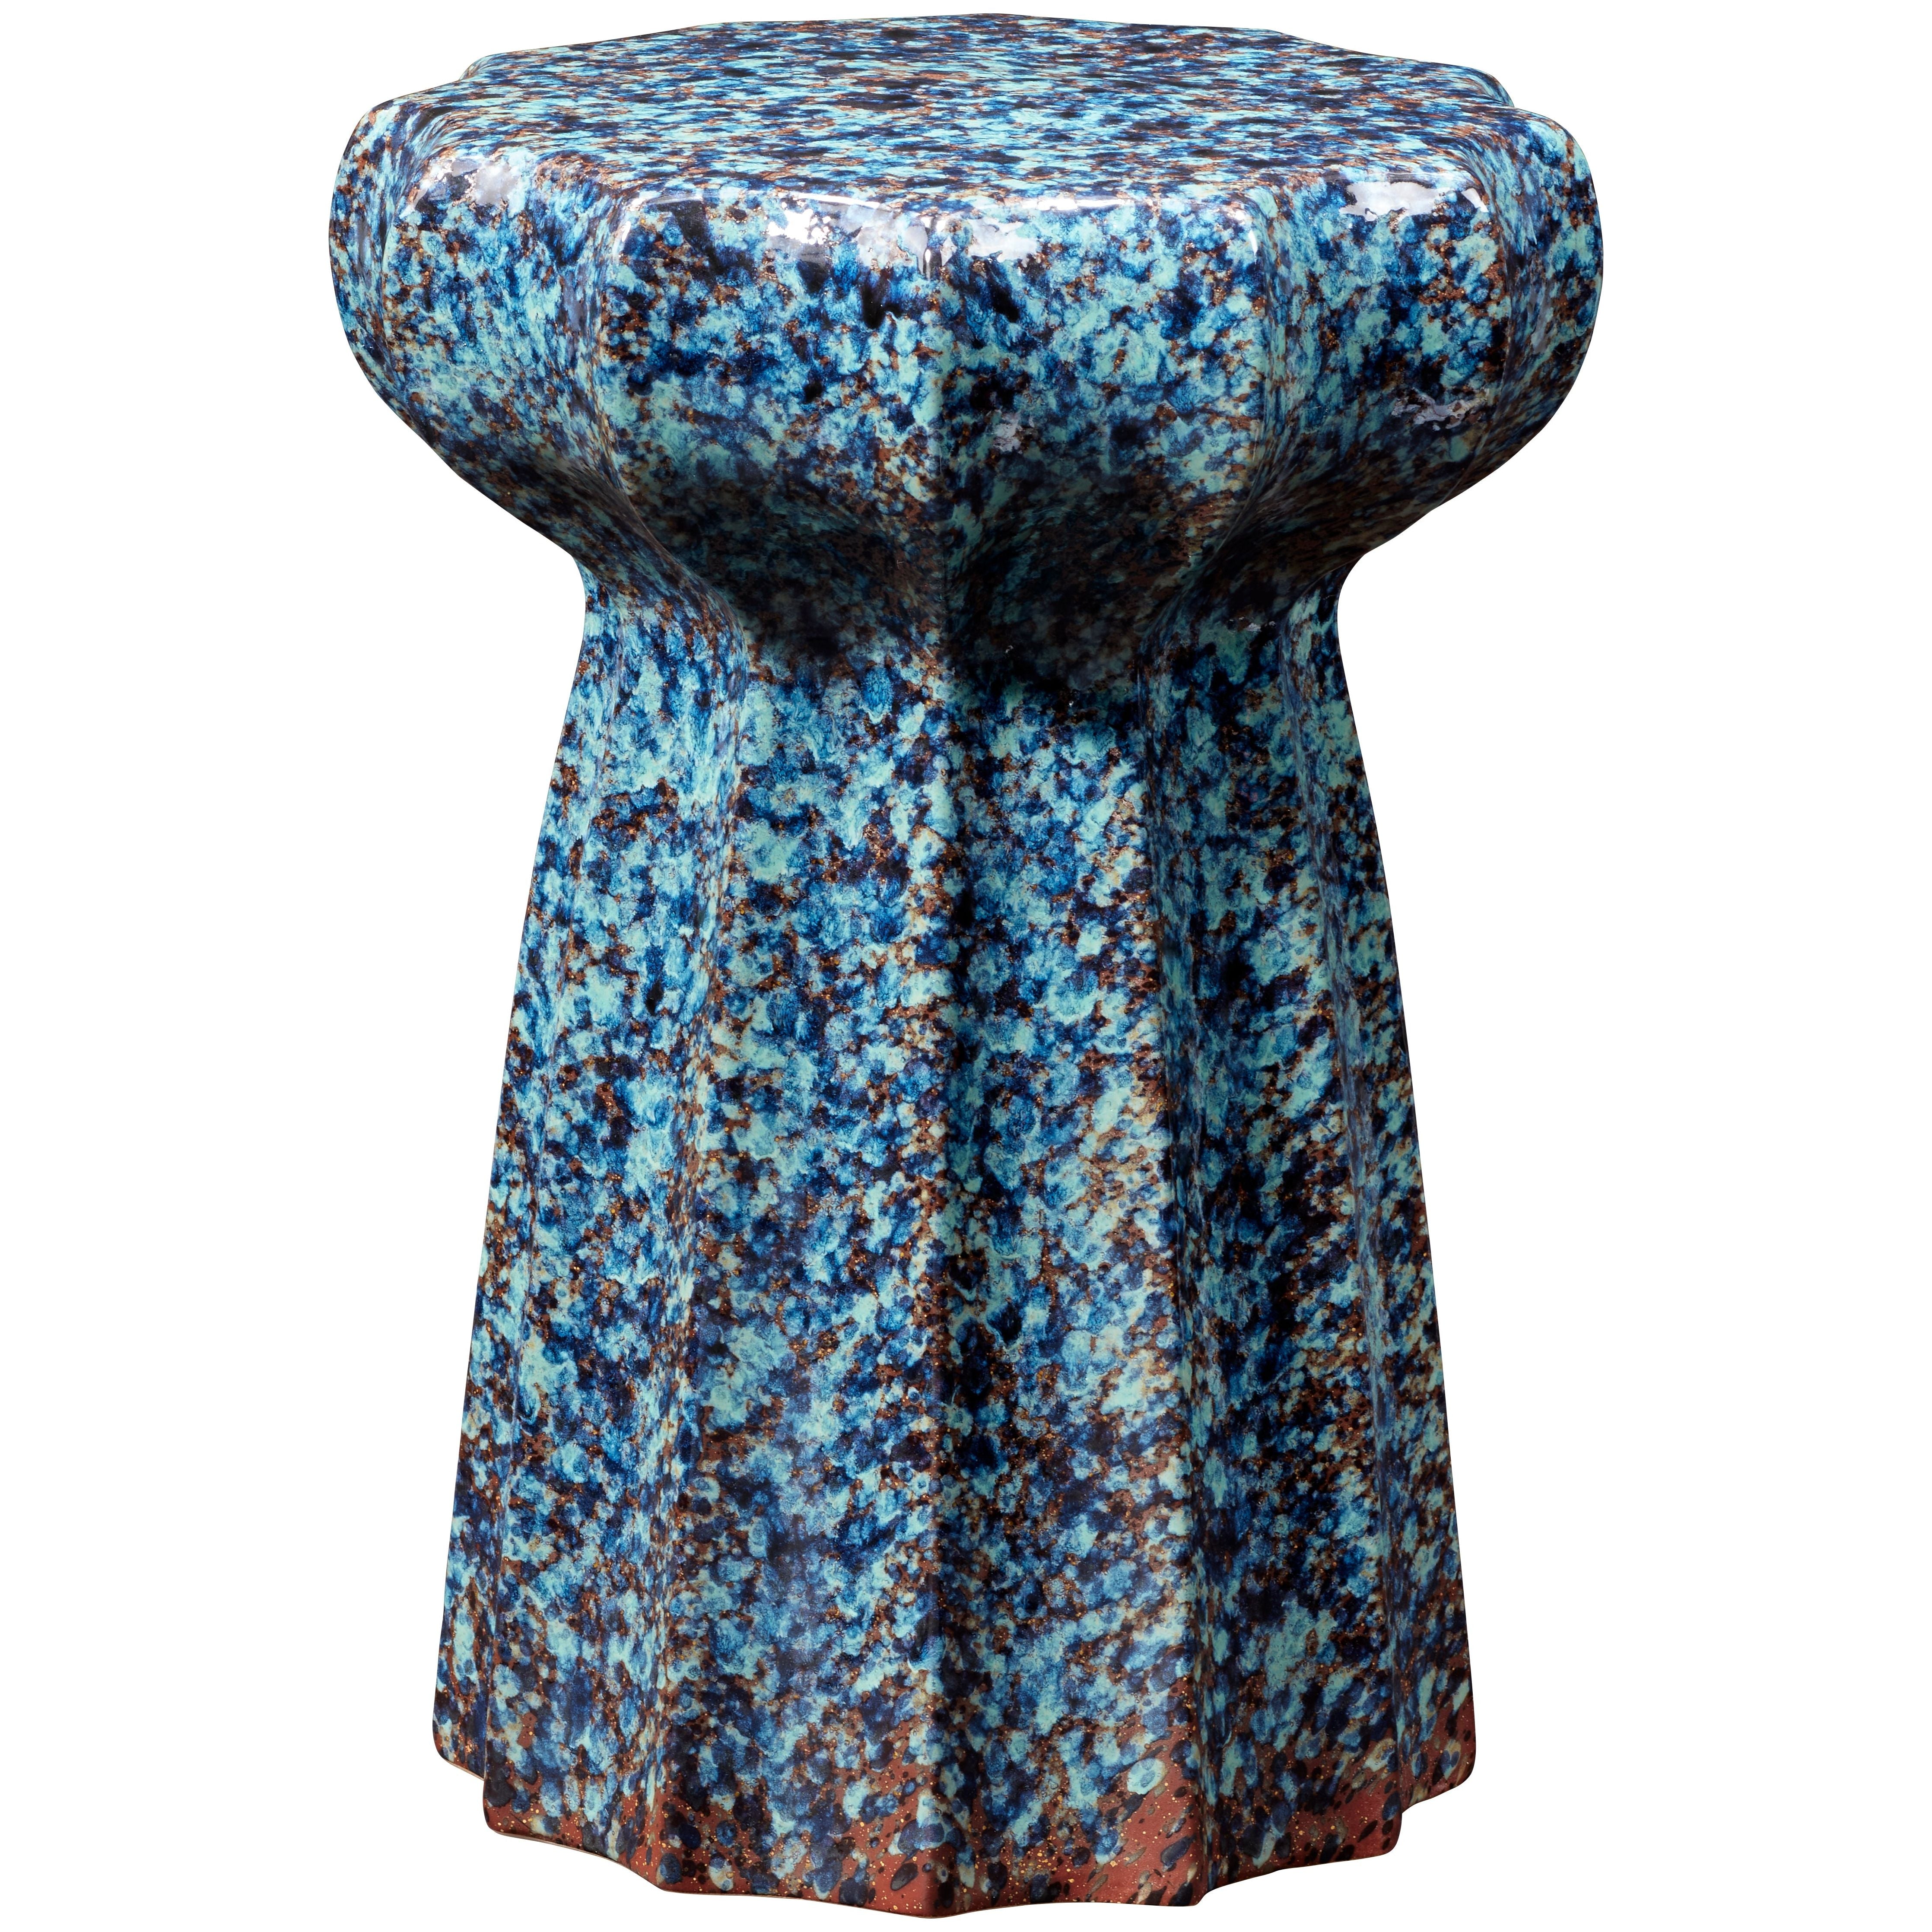 Jamie Young Company - 20OYST-STMB - Oyster Side Table - Oyster - Multi-Blue